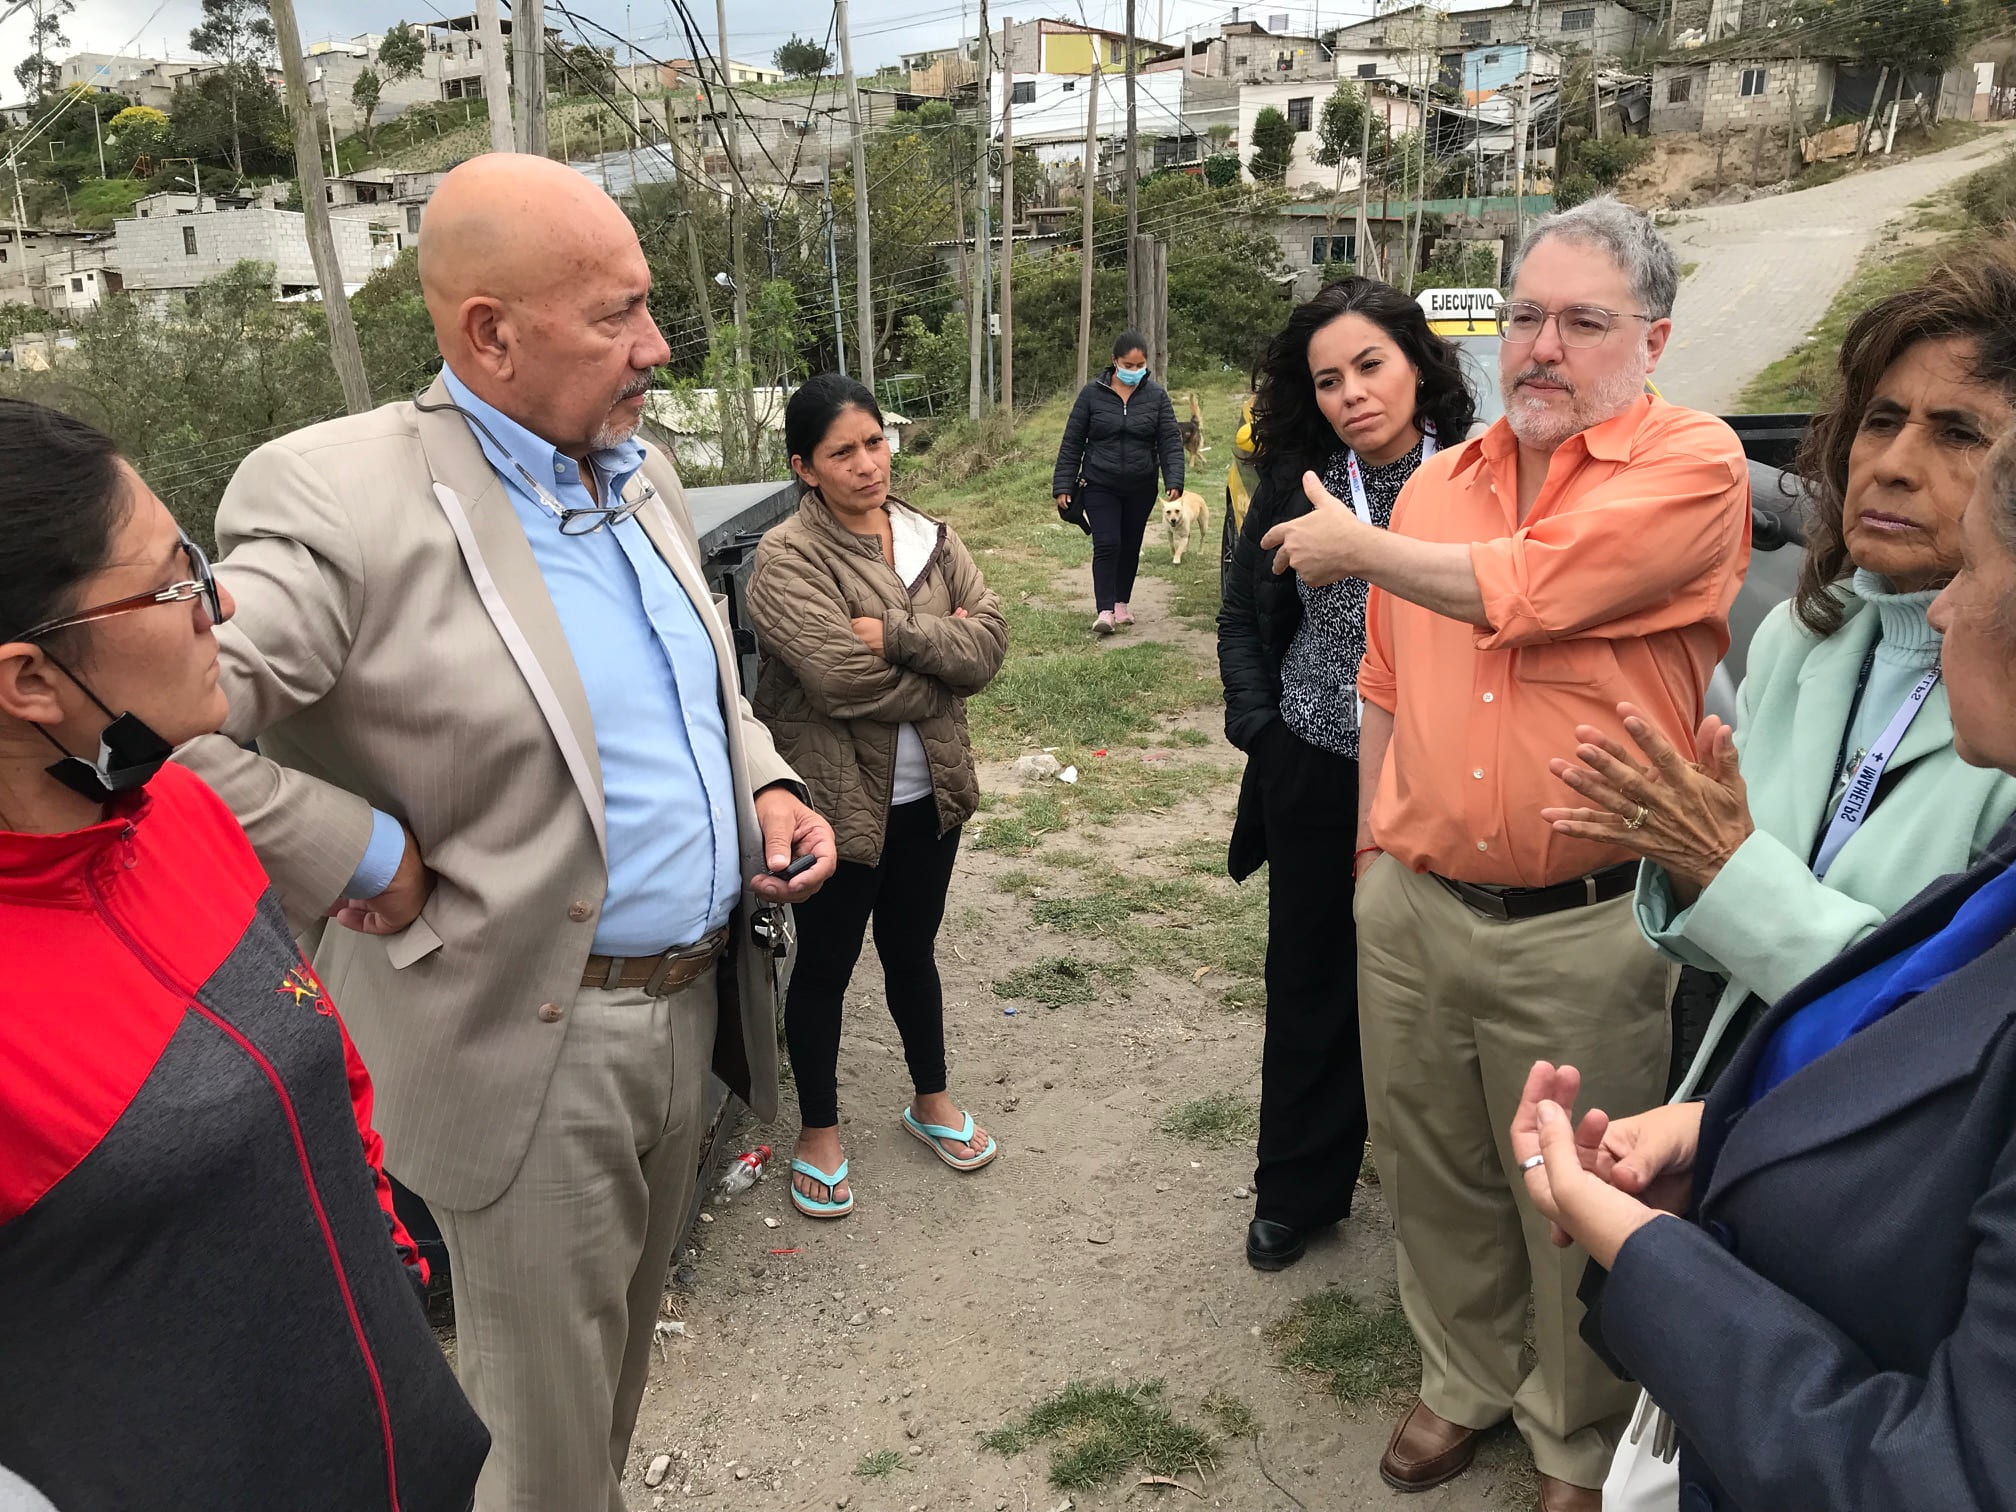 In advance of their 2023 humanitarian mission, UCI Health’s Dr. Cristobal Barrios Jr. (in orange shirt) and IMAHelps co-founder Ines Allen (in aqua jacket) meet in Ecuador with another nonprofit leader, Roberto Altamirano (in blue shirt), and community members.